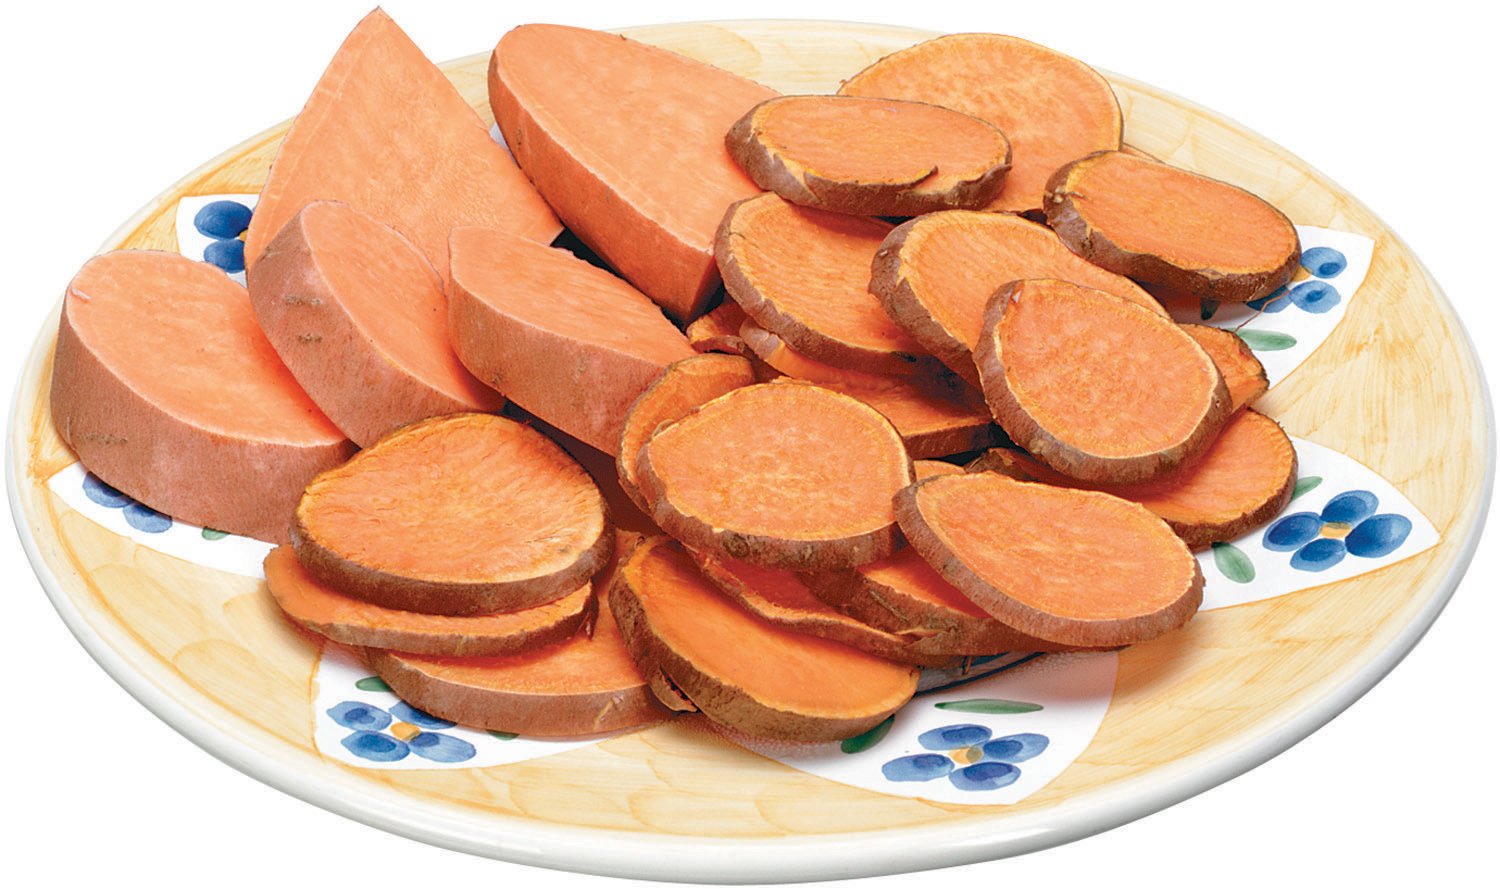 Slices Sweet Potatoes on a Plate Food Picture